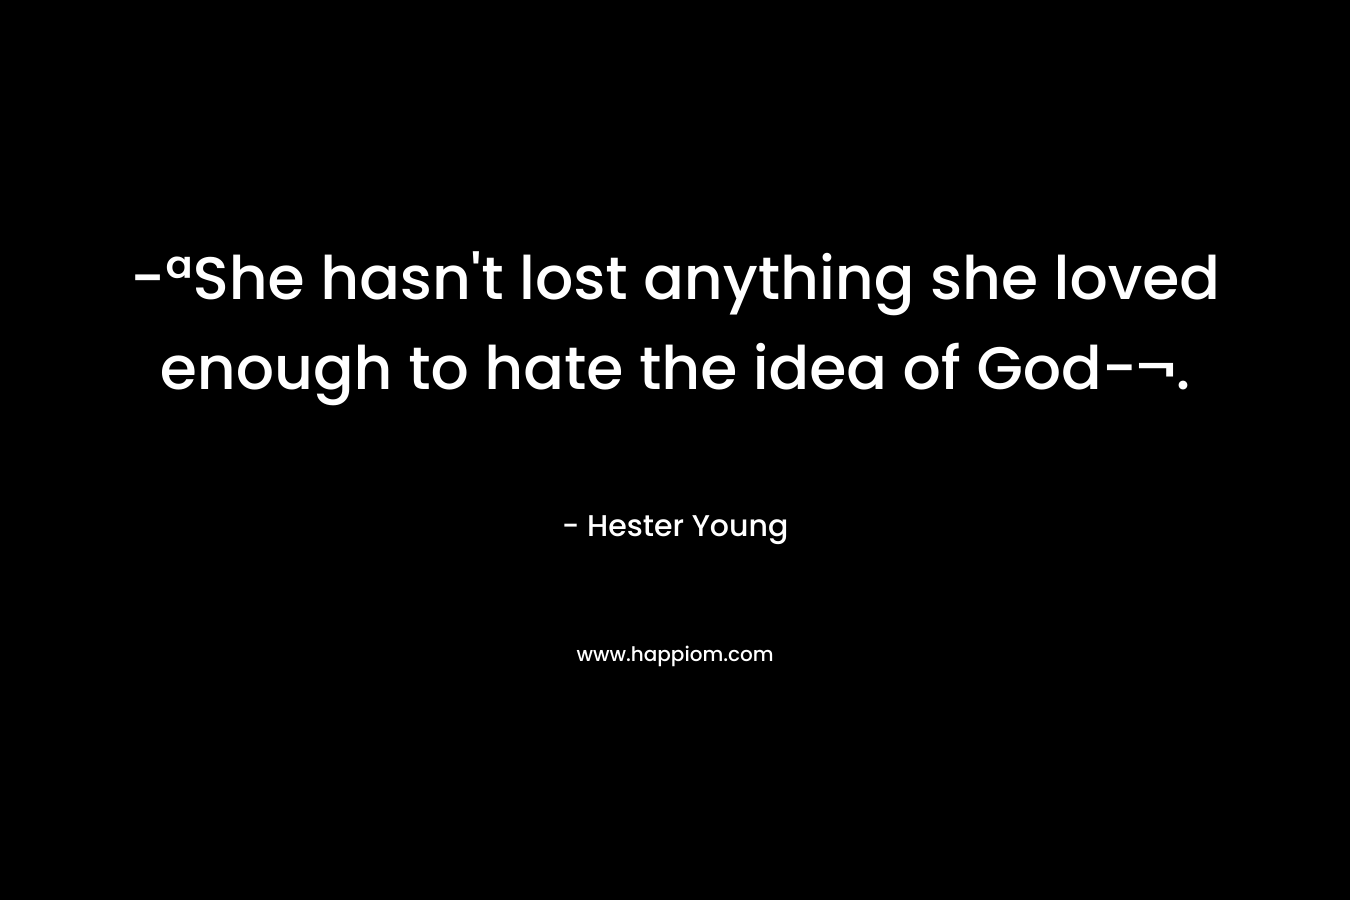 -ªShe hasn’t lost anything she loved enough to hate the idea of God-¬. – Hester Young